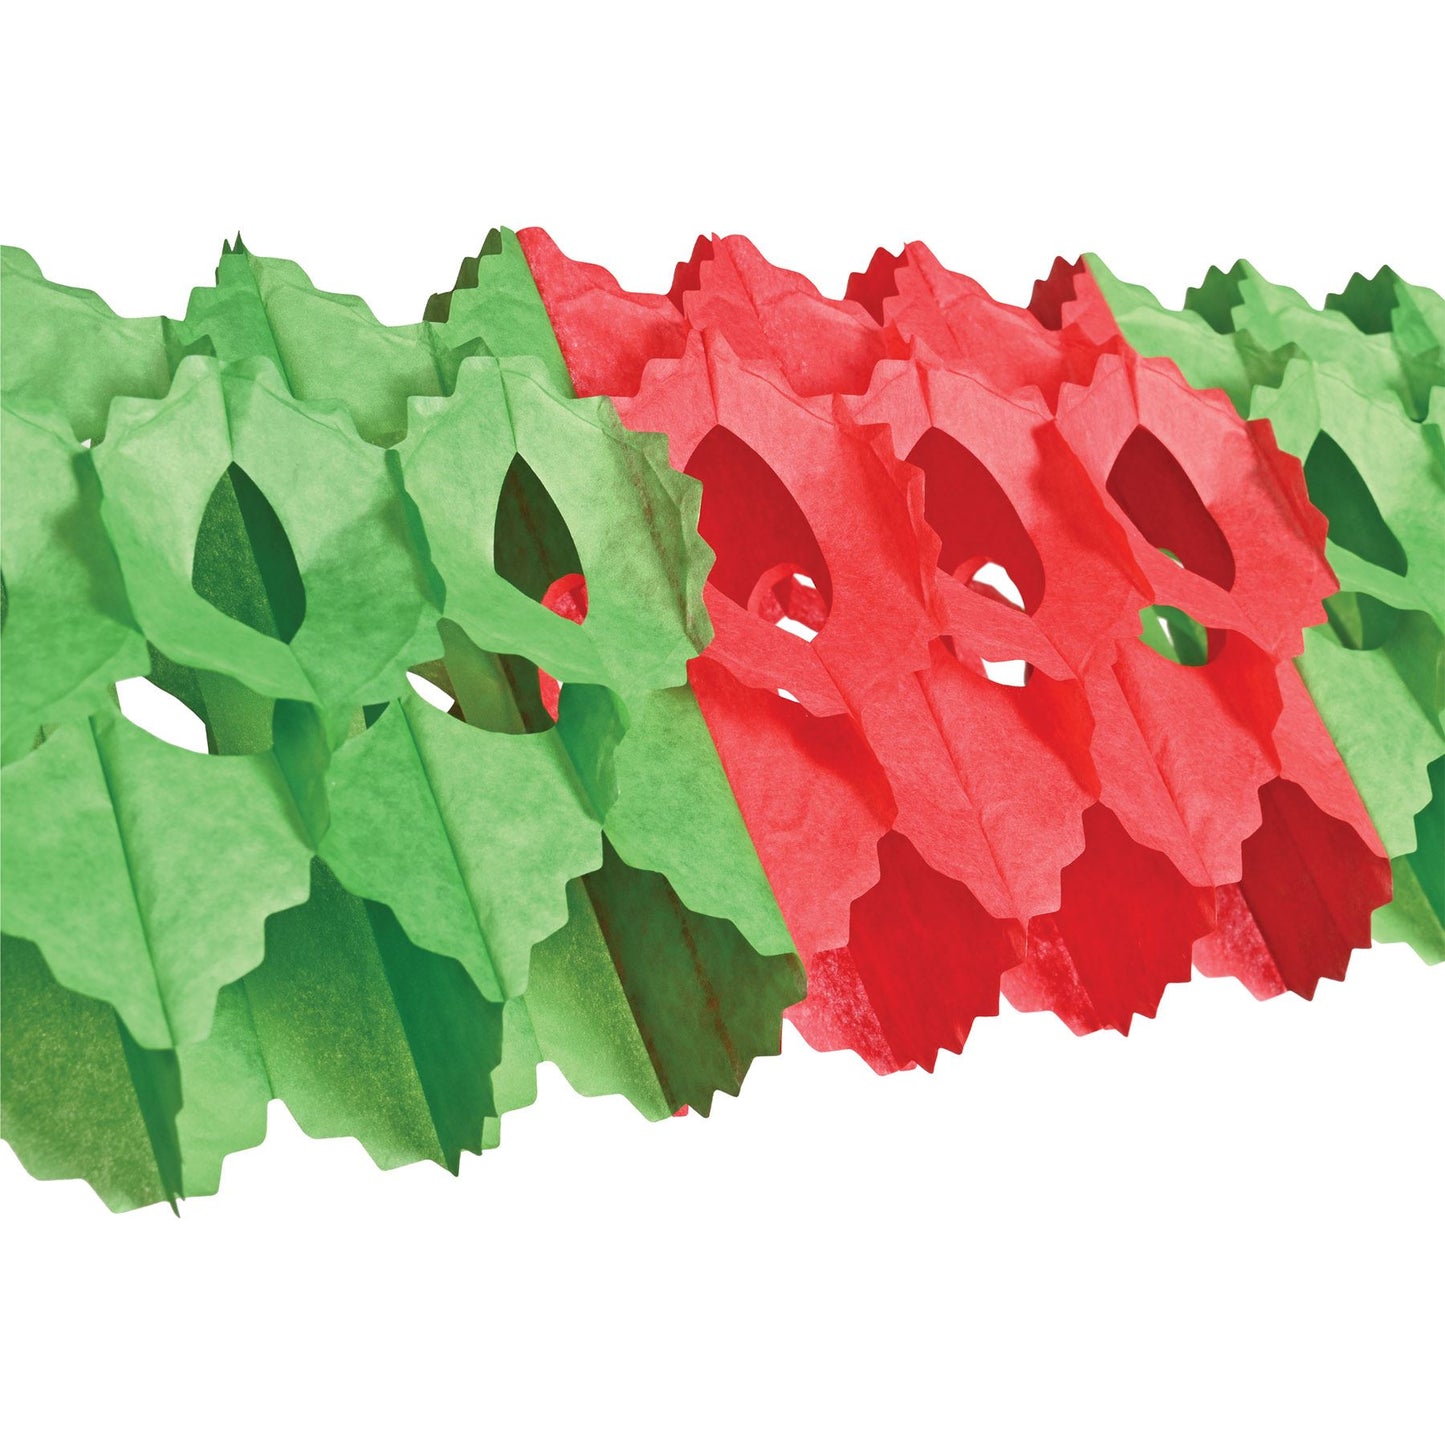 Beistle Red and Green Arcade Garland - Party Supply Decoration for Christmas / Winter